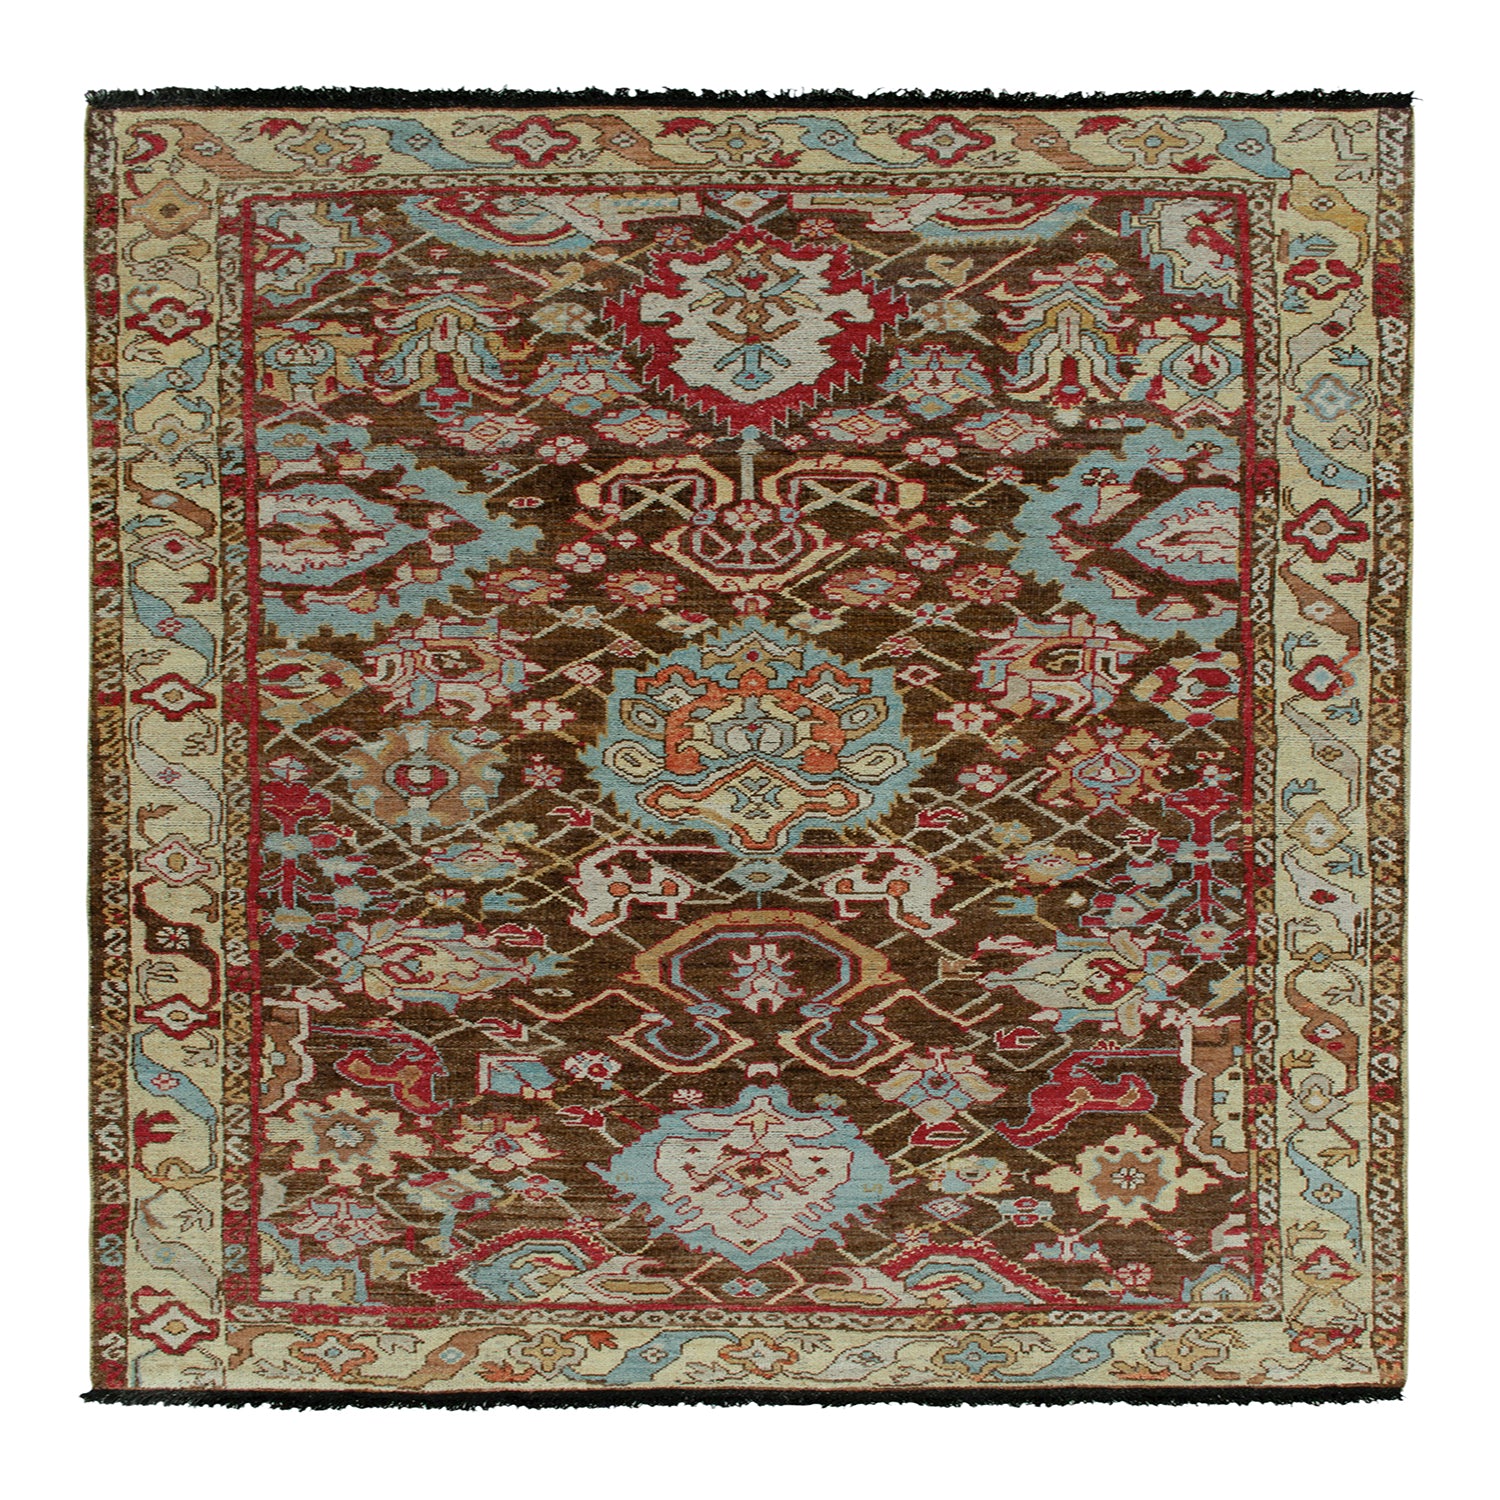 Exquisite Oriental rug with intricate patterns and diverse color palette.